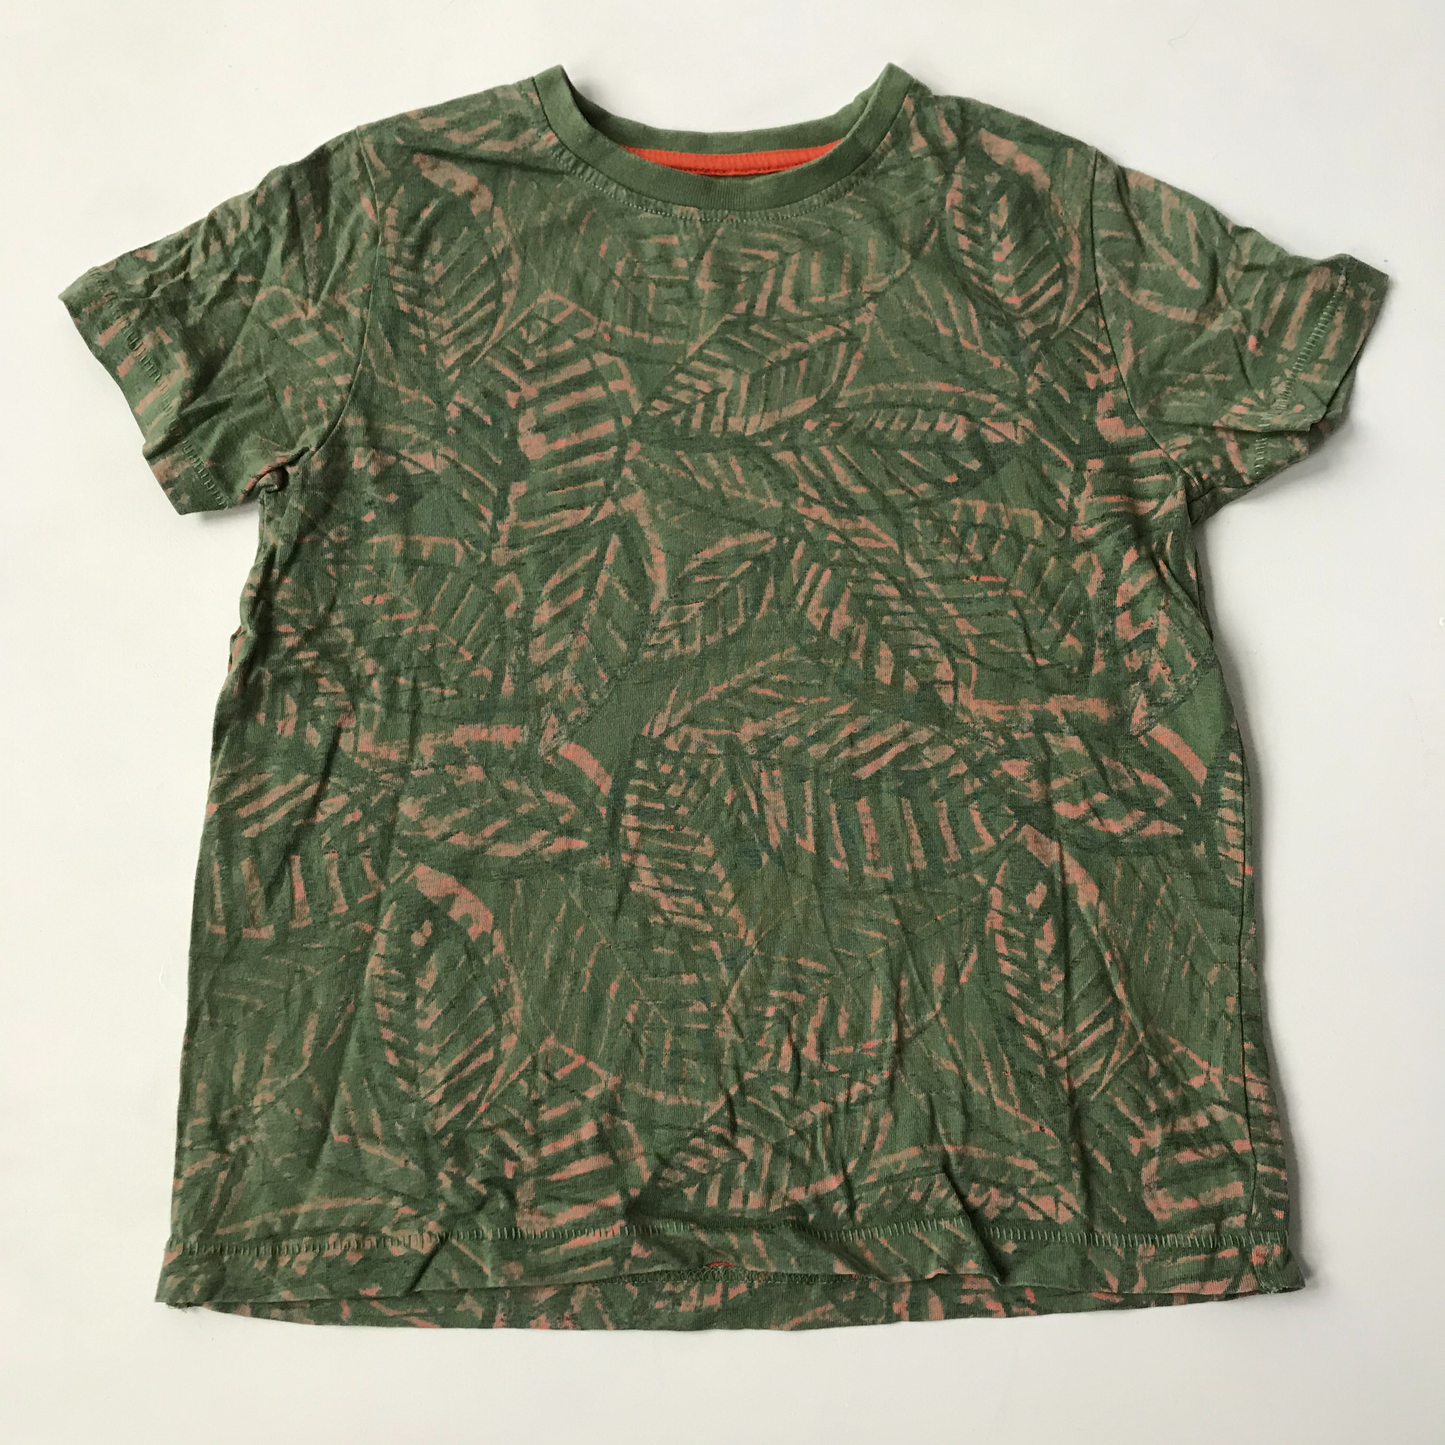 T-shirt - Leaves - Age 5